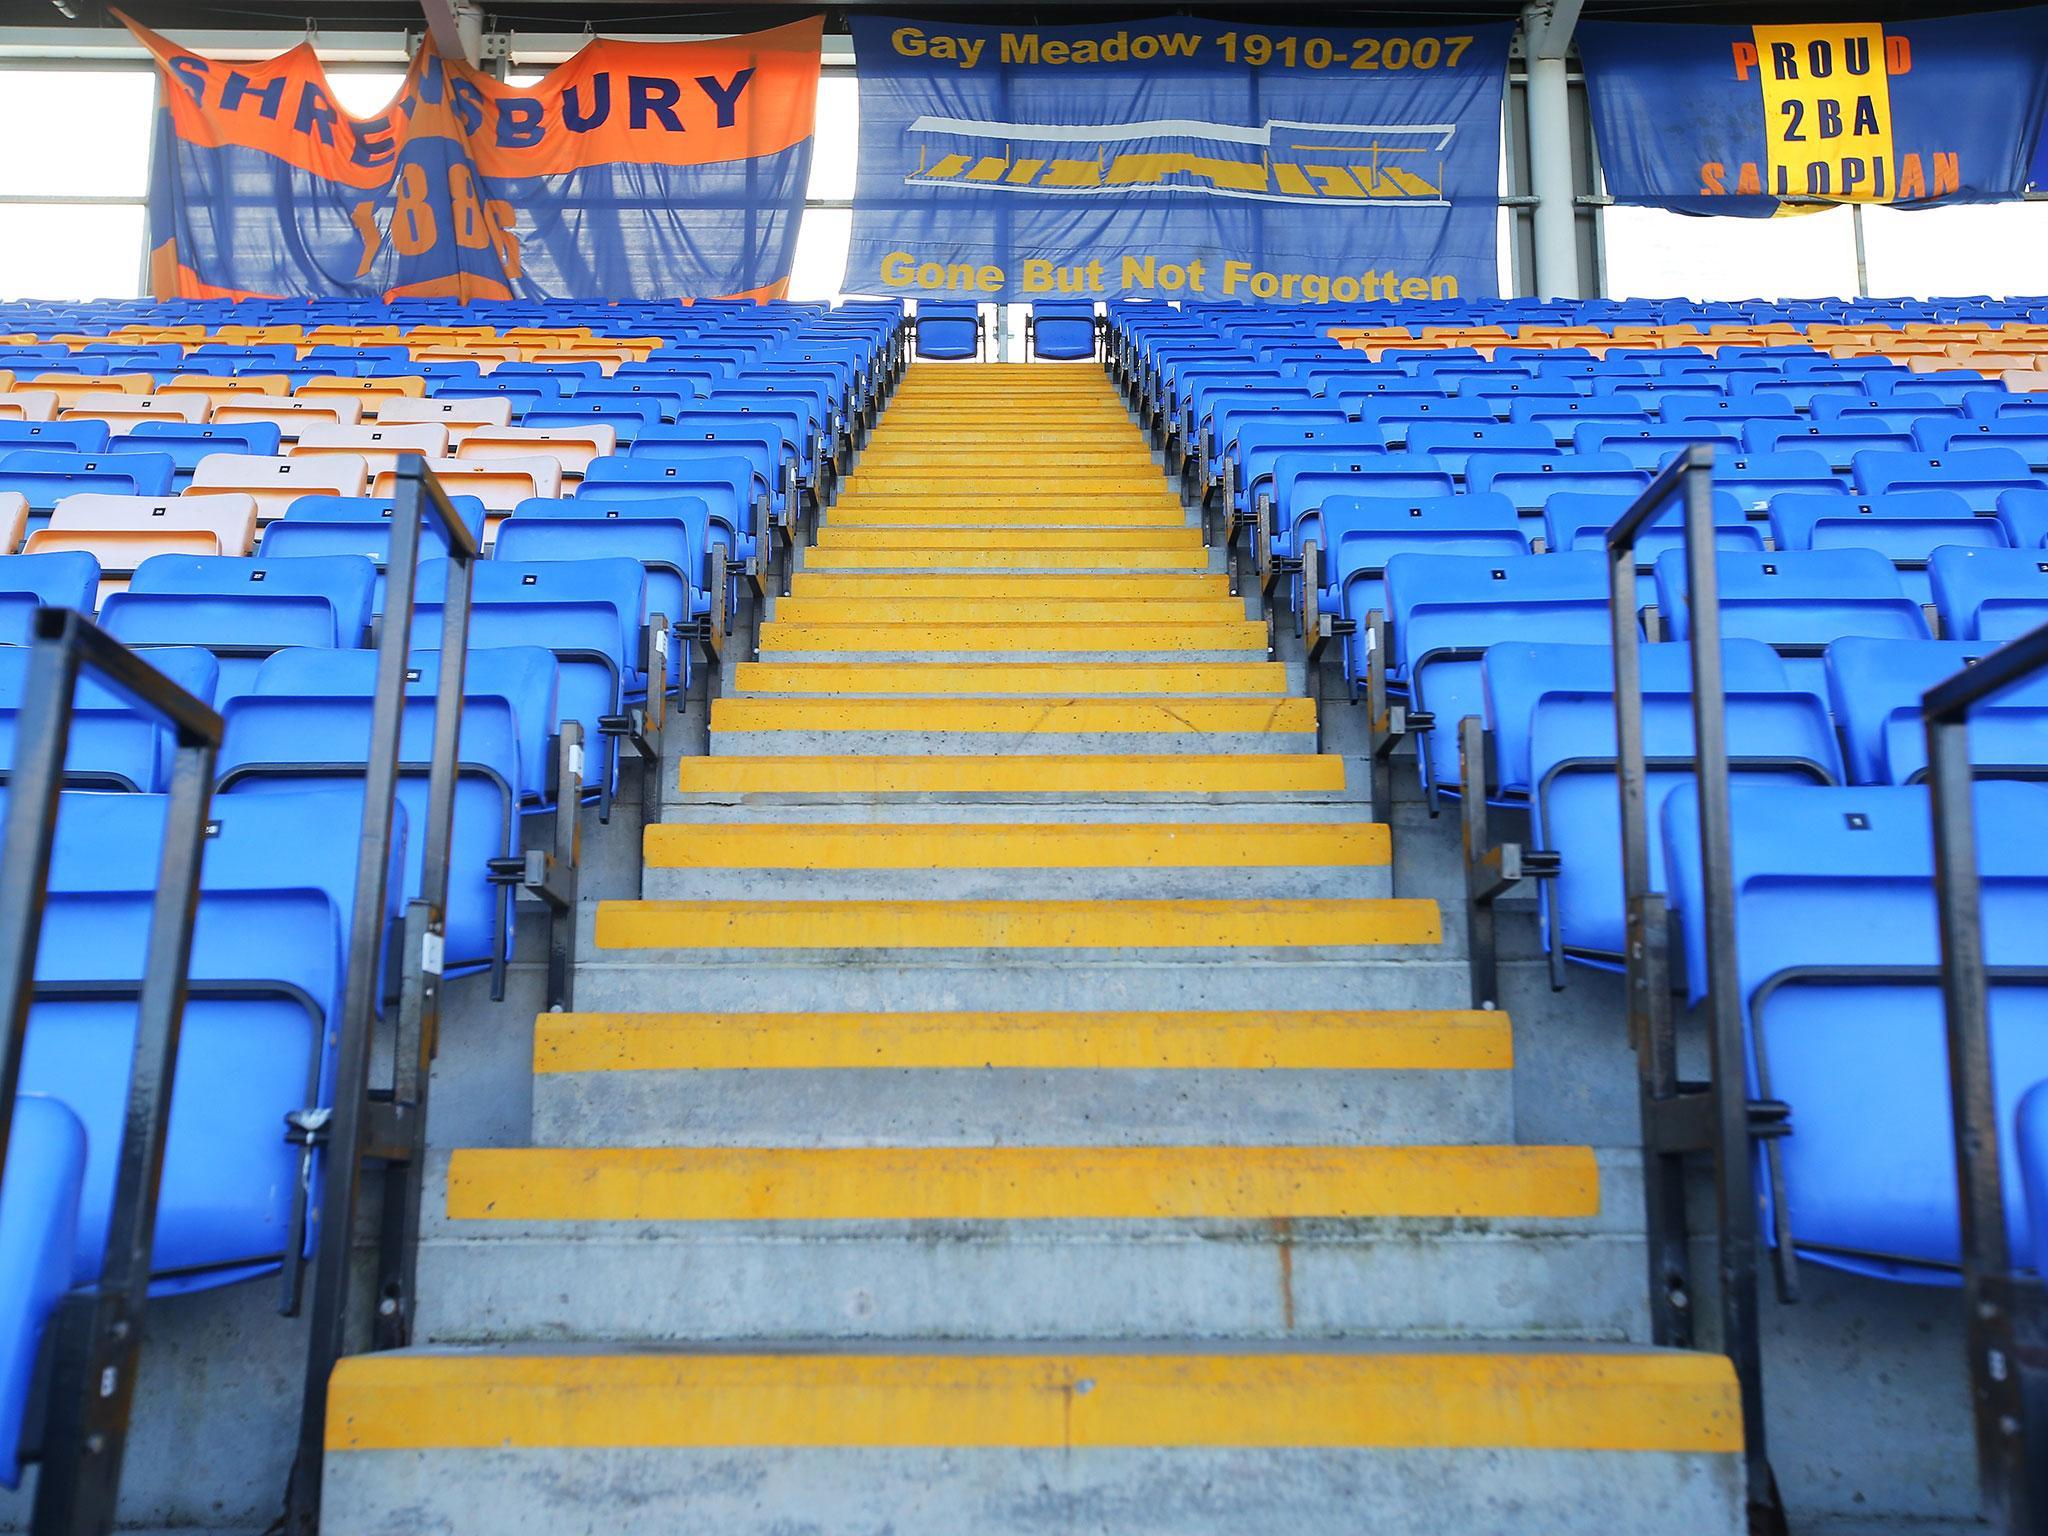 Shrewsbury have applied for a safe standing section